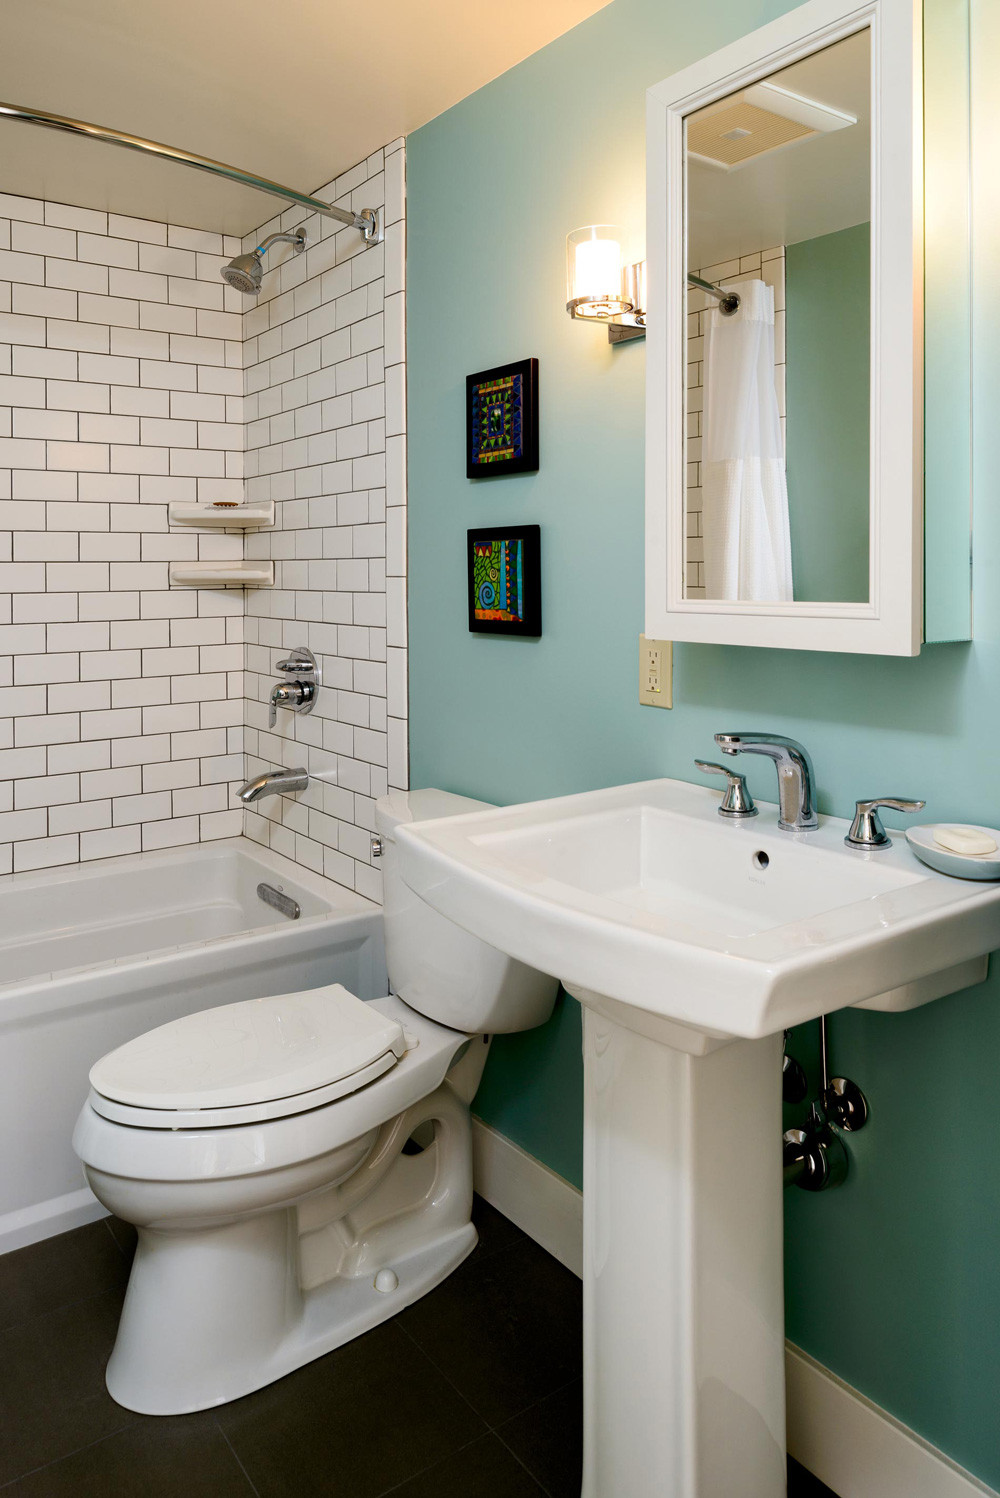 Images Of Small Bathroom
 5 Creative Solutions for Small Bathrooms